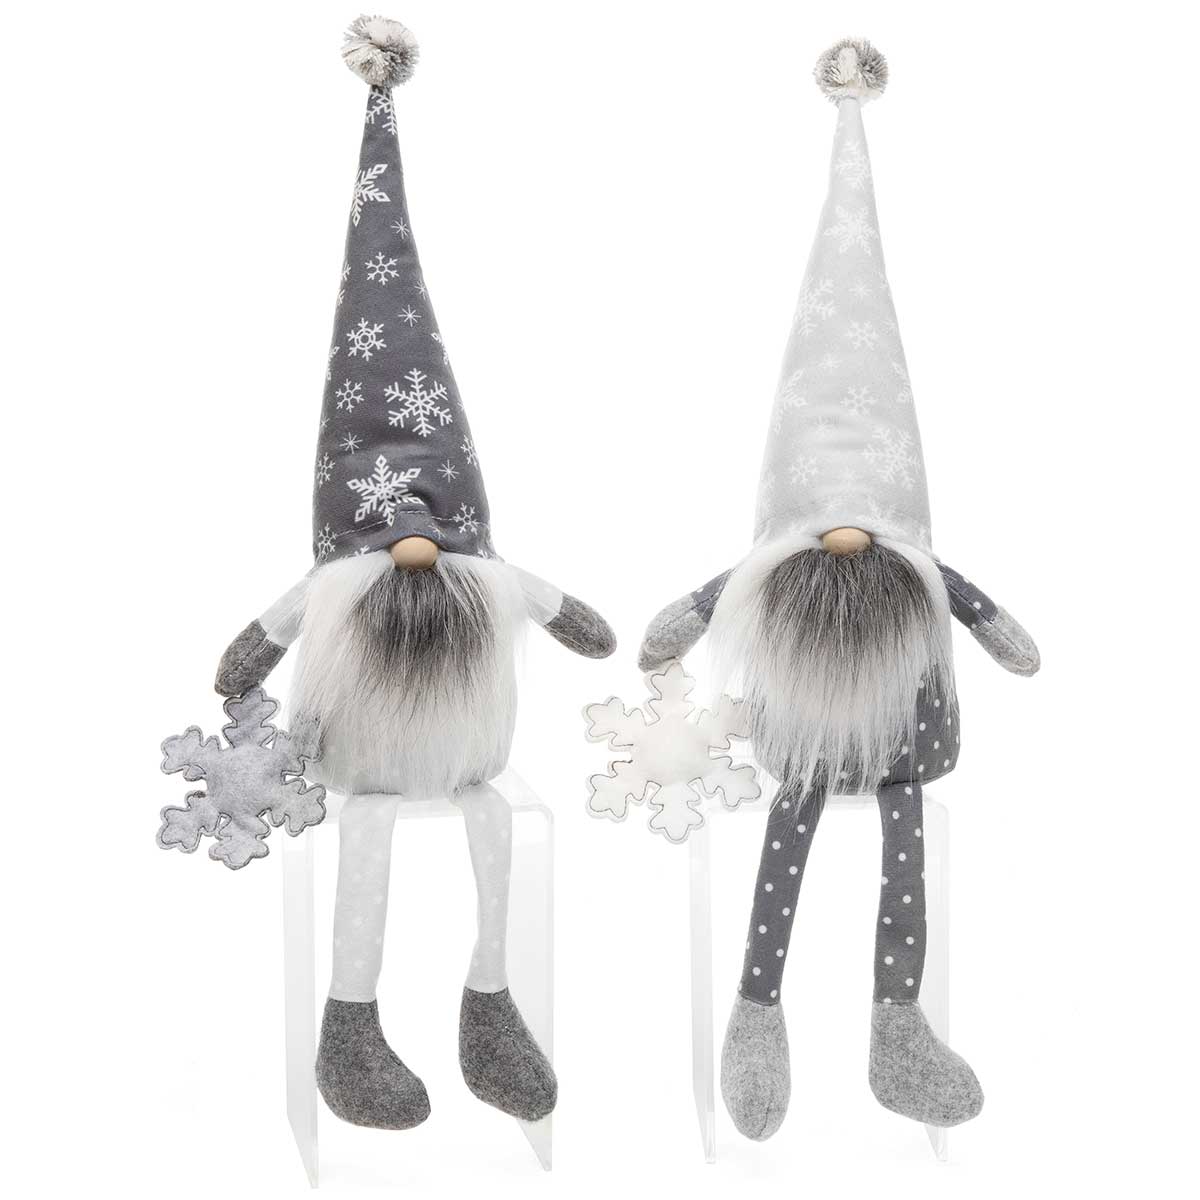 SNOWFLAKE GNOME WITH PINDOT BODY 2 AST LARGE